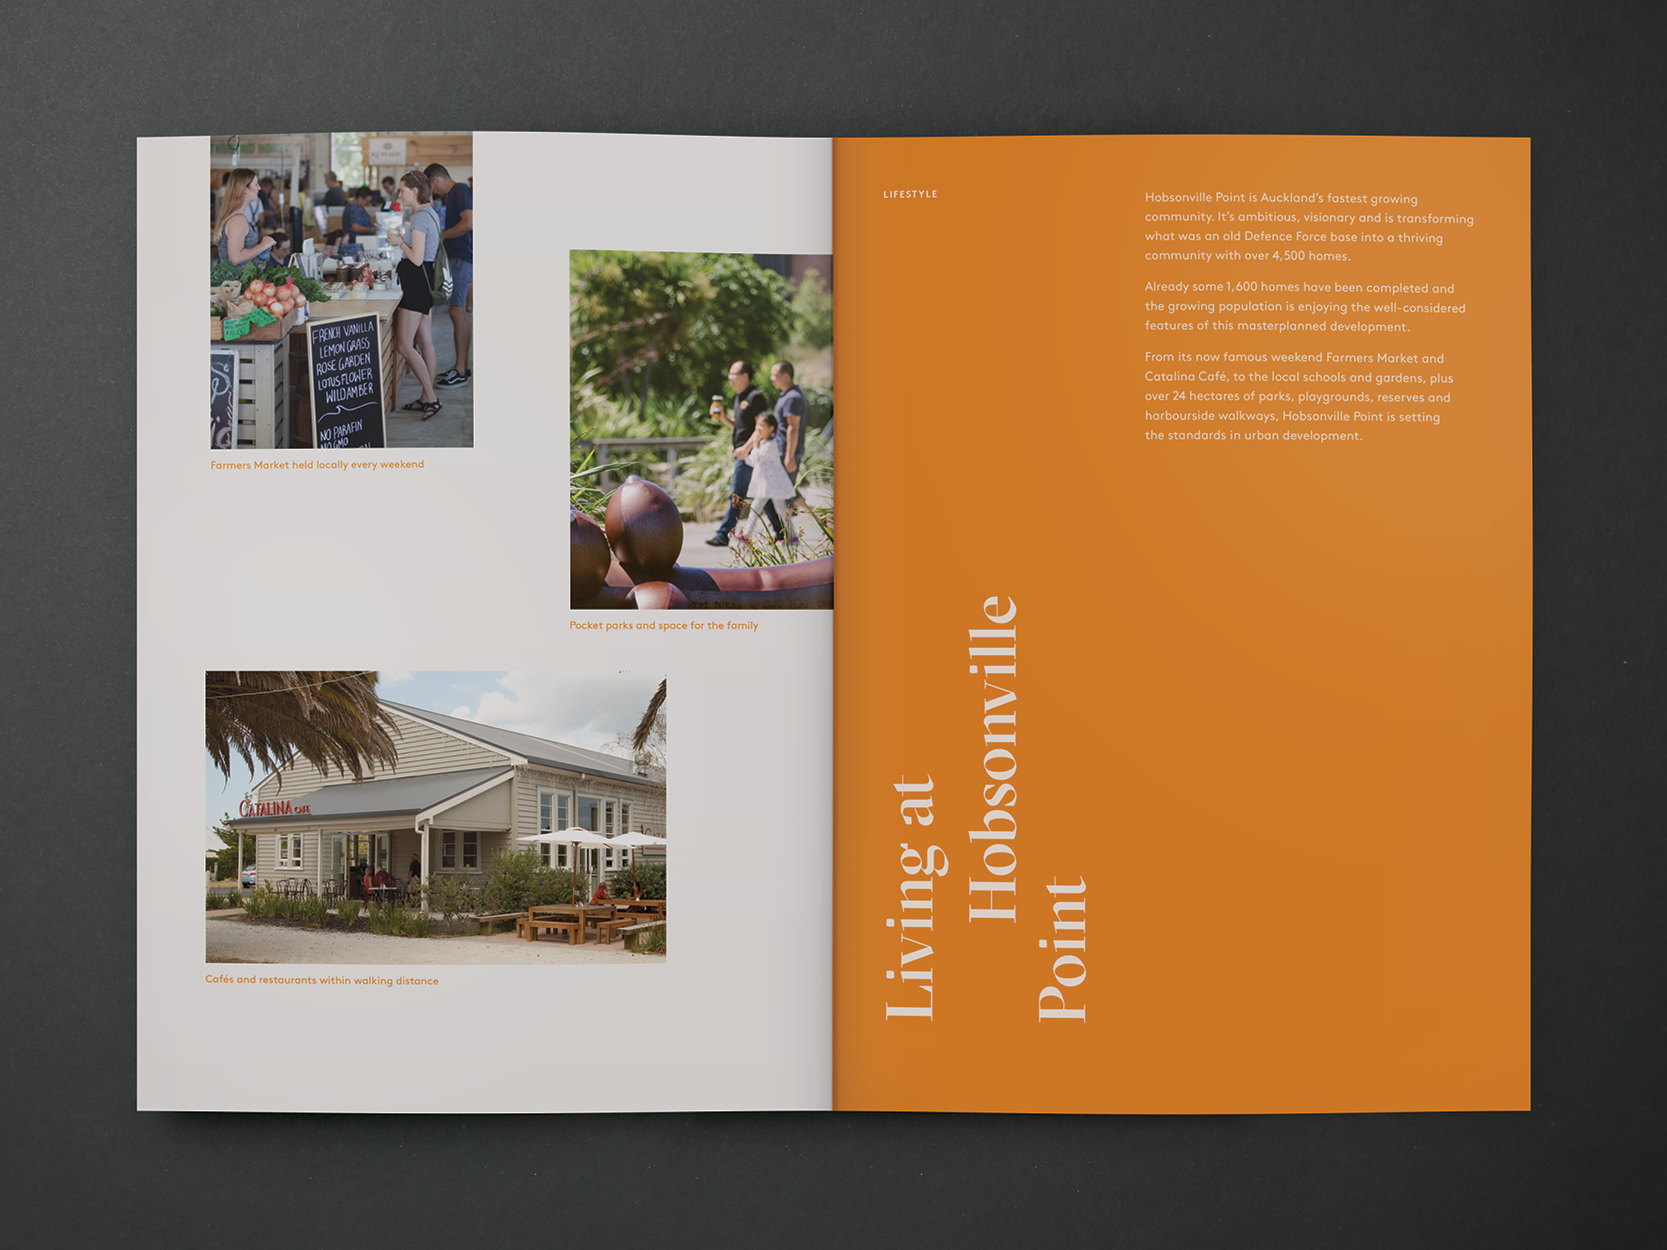 Double Page spread showcasing the lifestyle in Hobsonville Point where the development is located